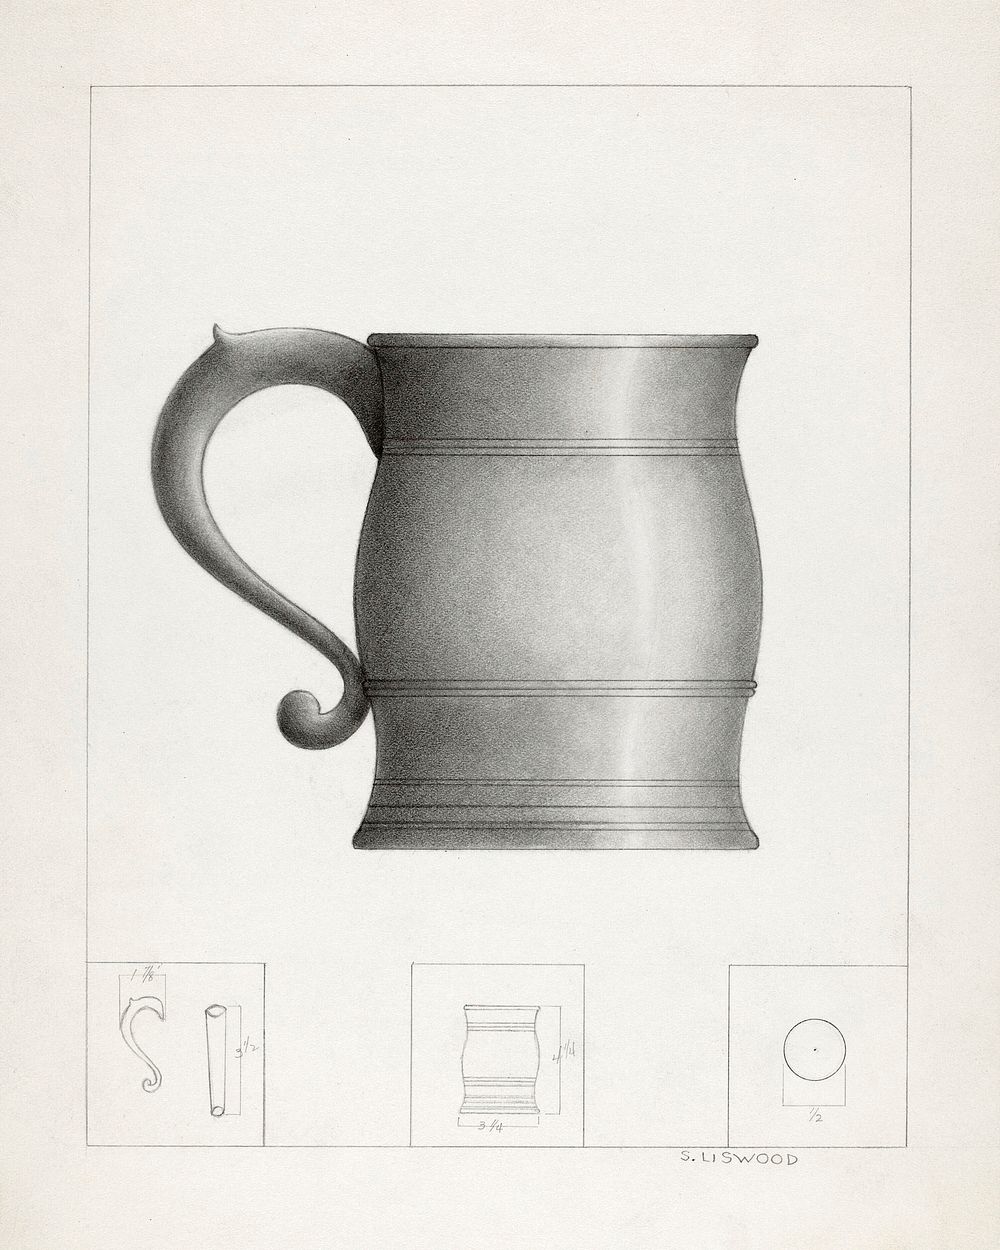 Pewter Mug (1935&ndash;1942)  by Sidney Liswood. Original from The National Gallery of Art. Digitally enhanced by rawpixel.